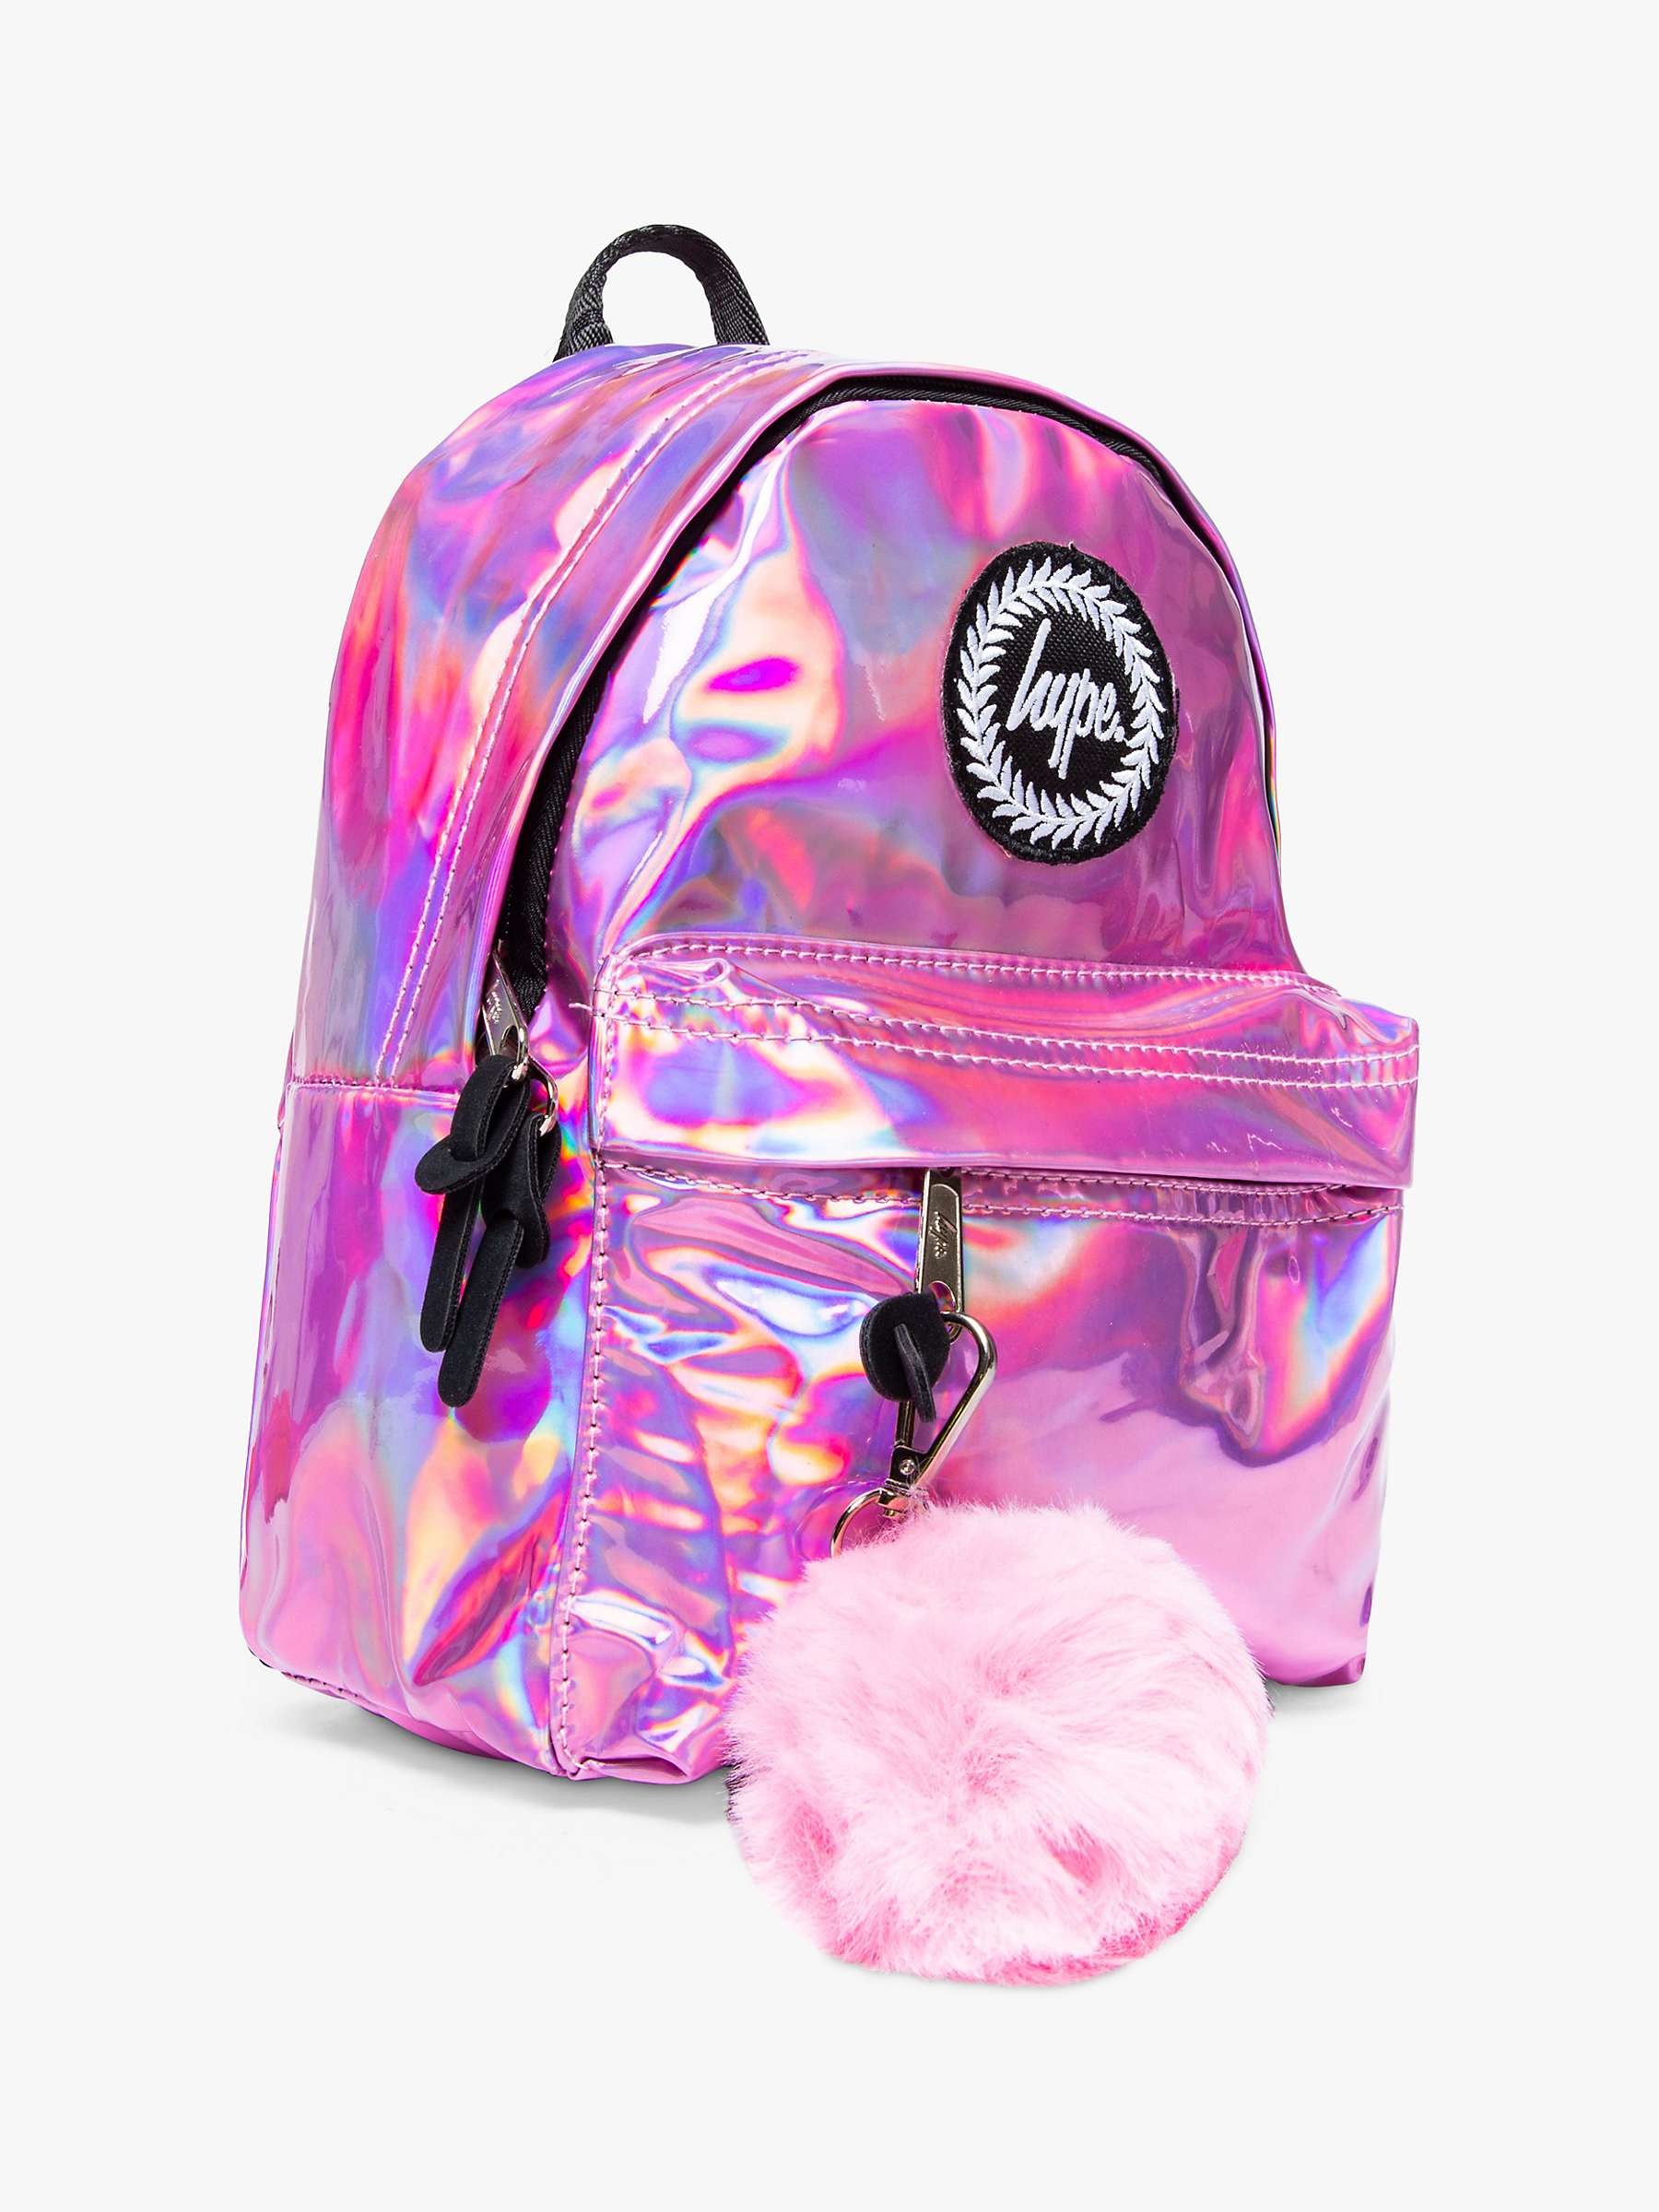 Buy Hype Kids' Holographic Mini Backpack, Pink Online at johnlewis.com